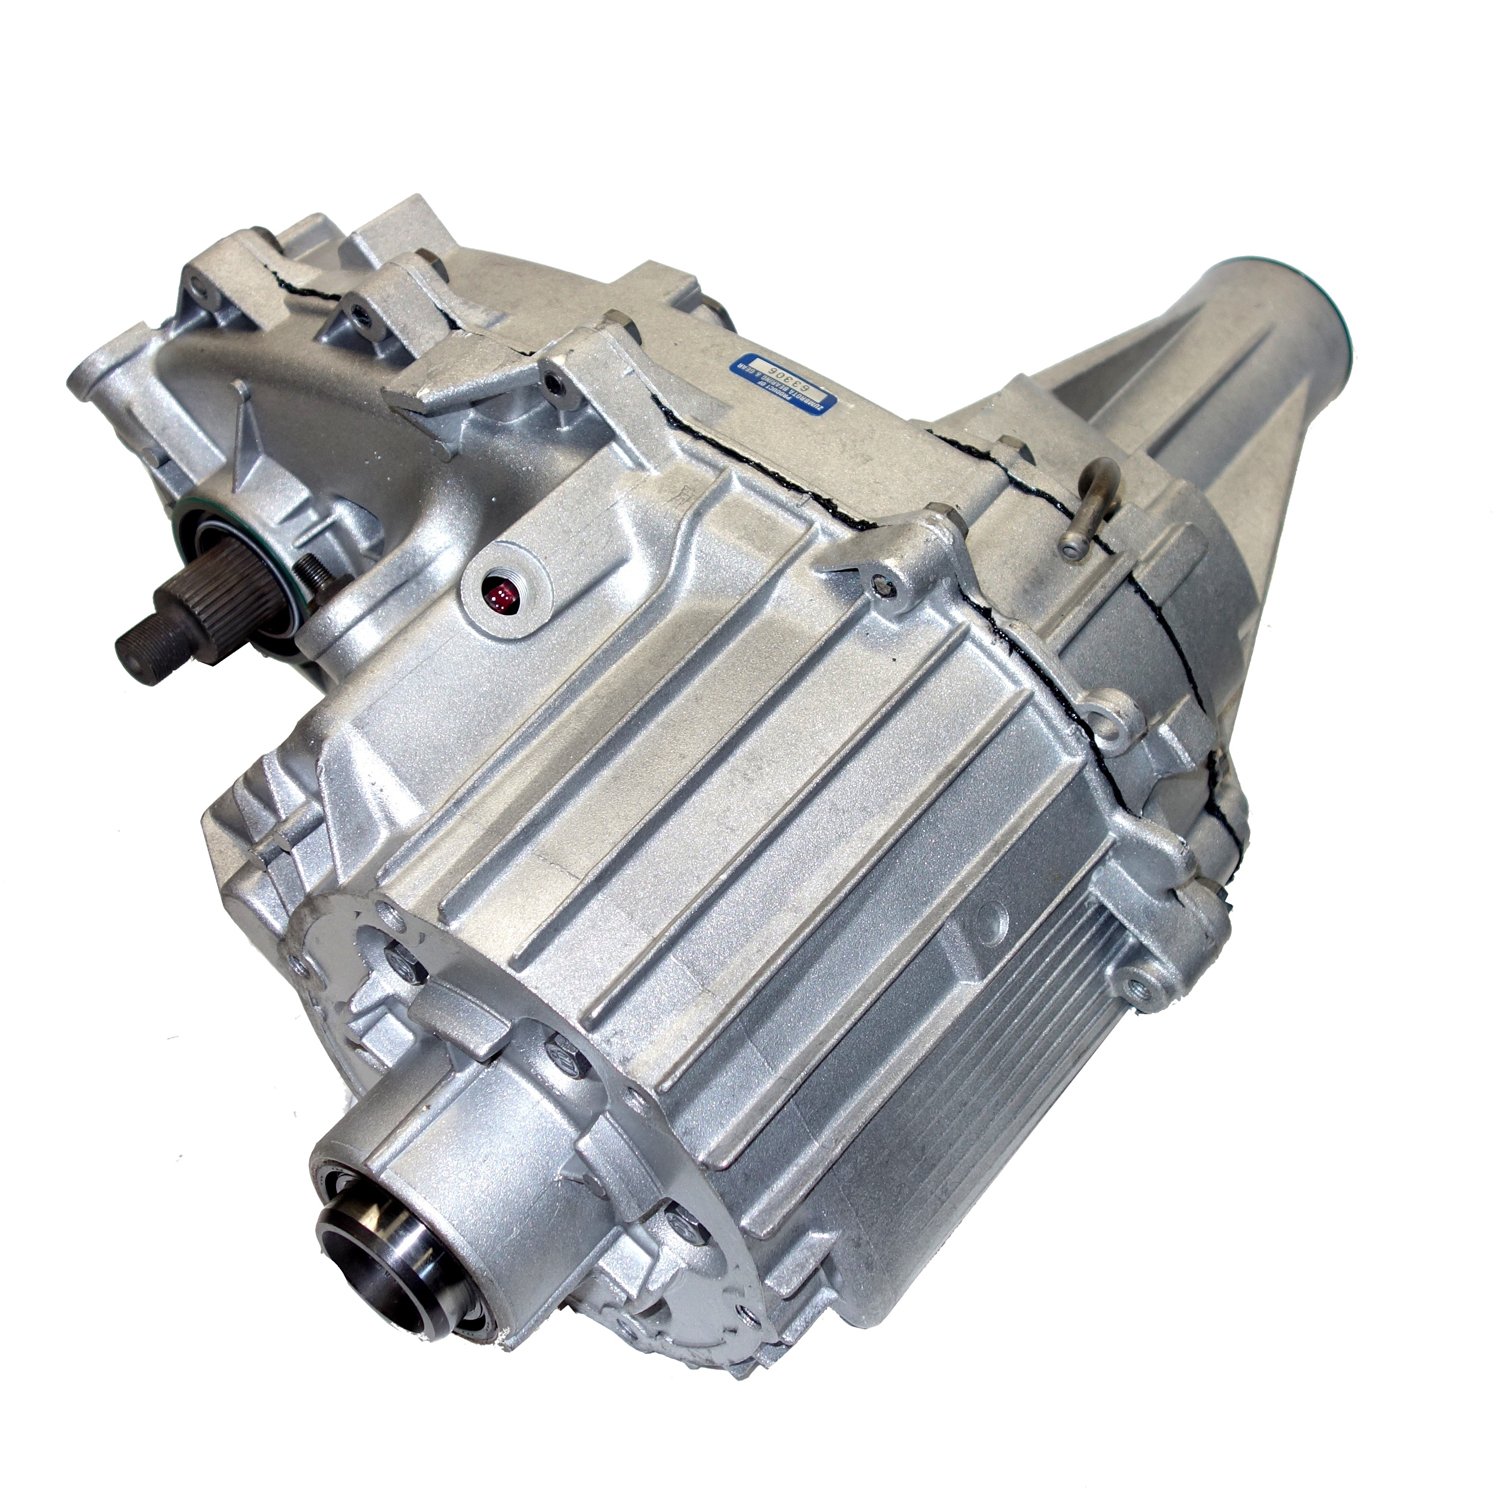 Remanufactured NP208 Transfer Case for Chrysler 80-82 D-series